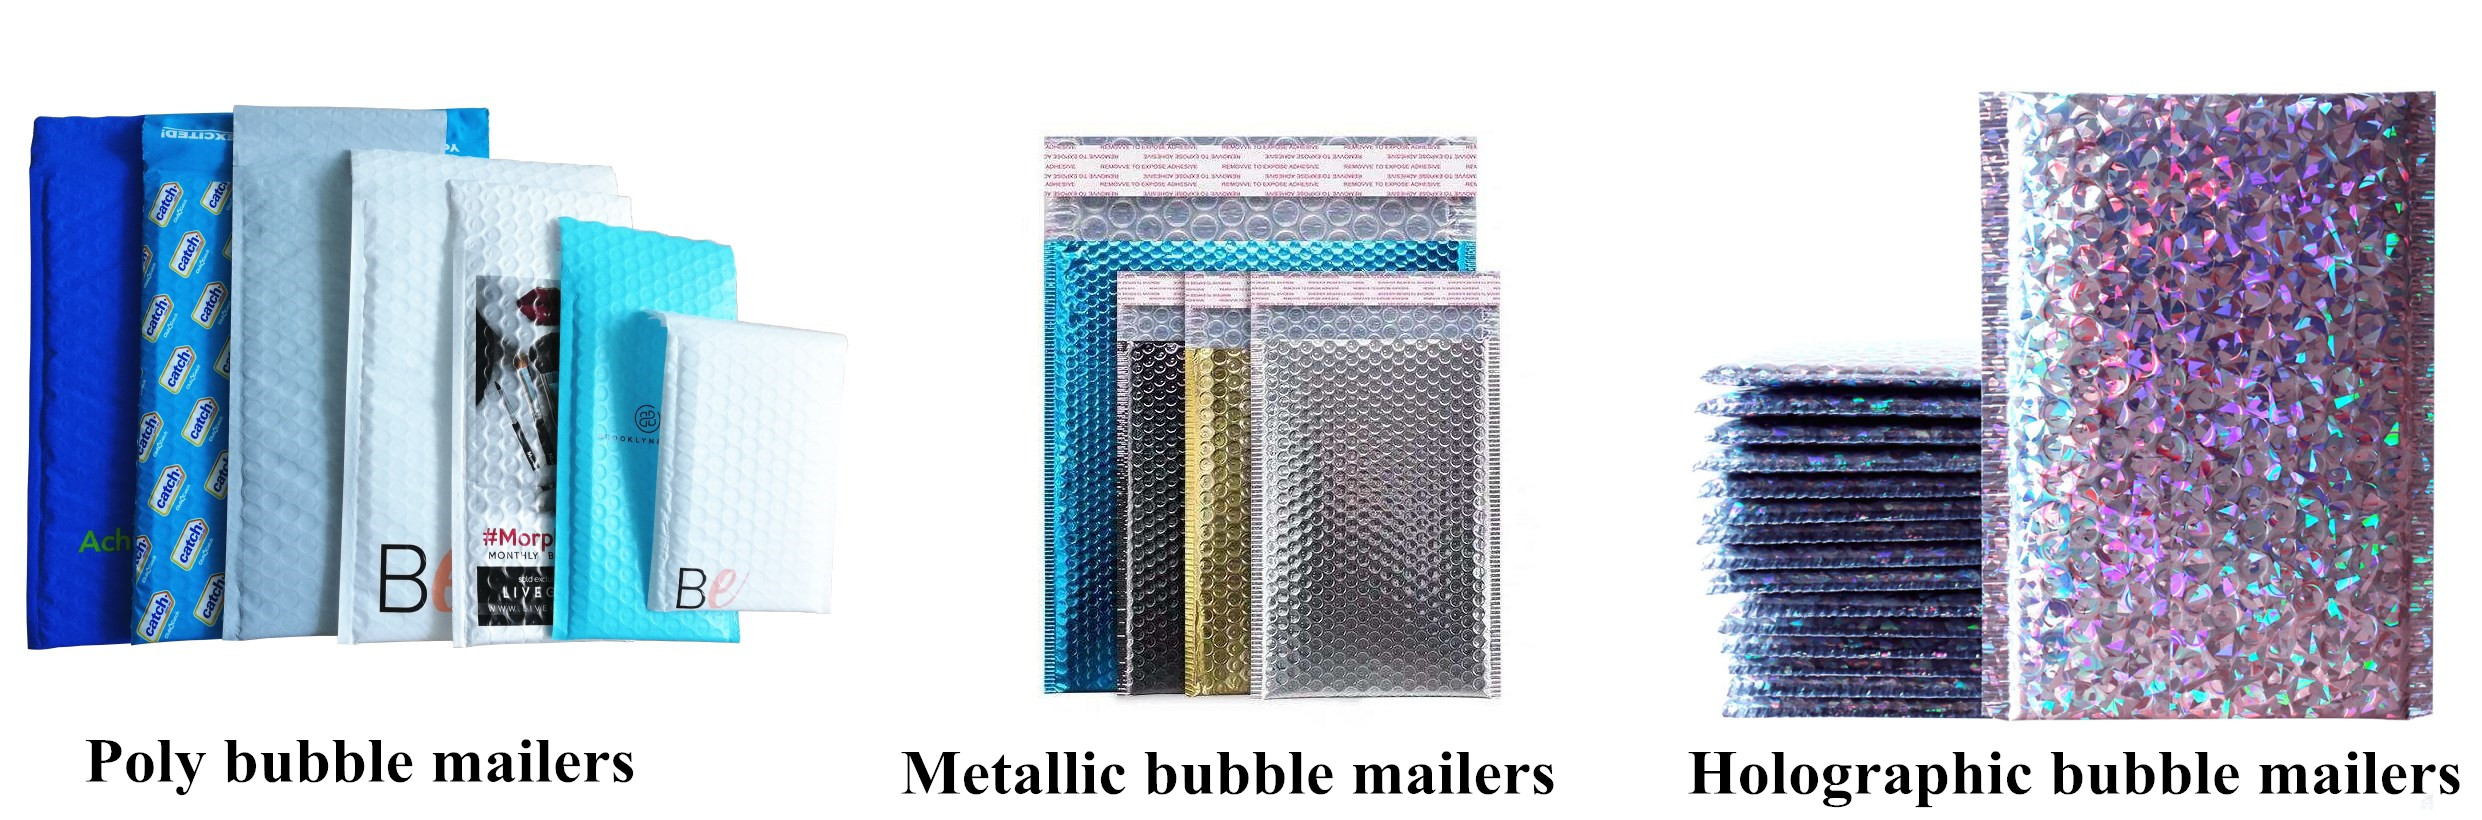 Another Material Bubble Mailers